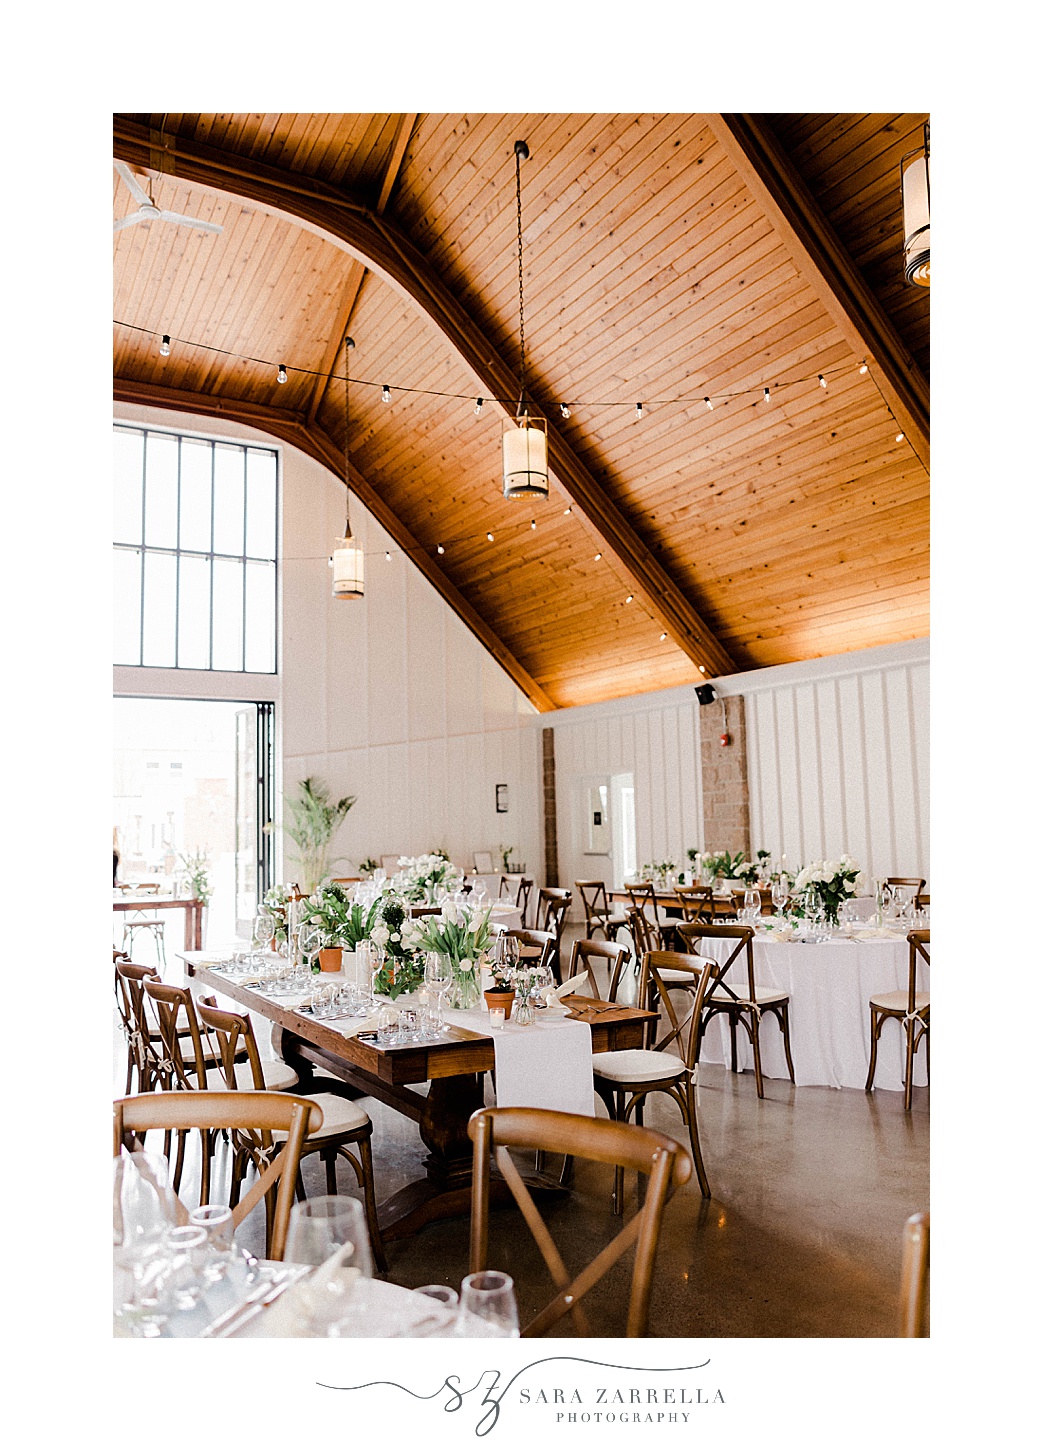 Shepard's Run wedding reception with long wooden tables